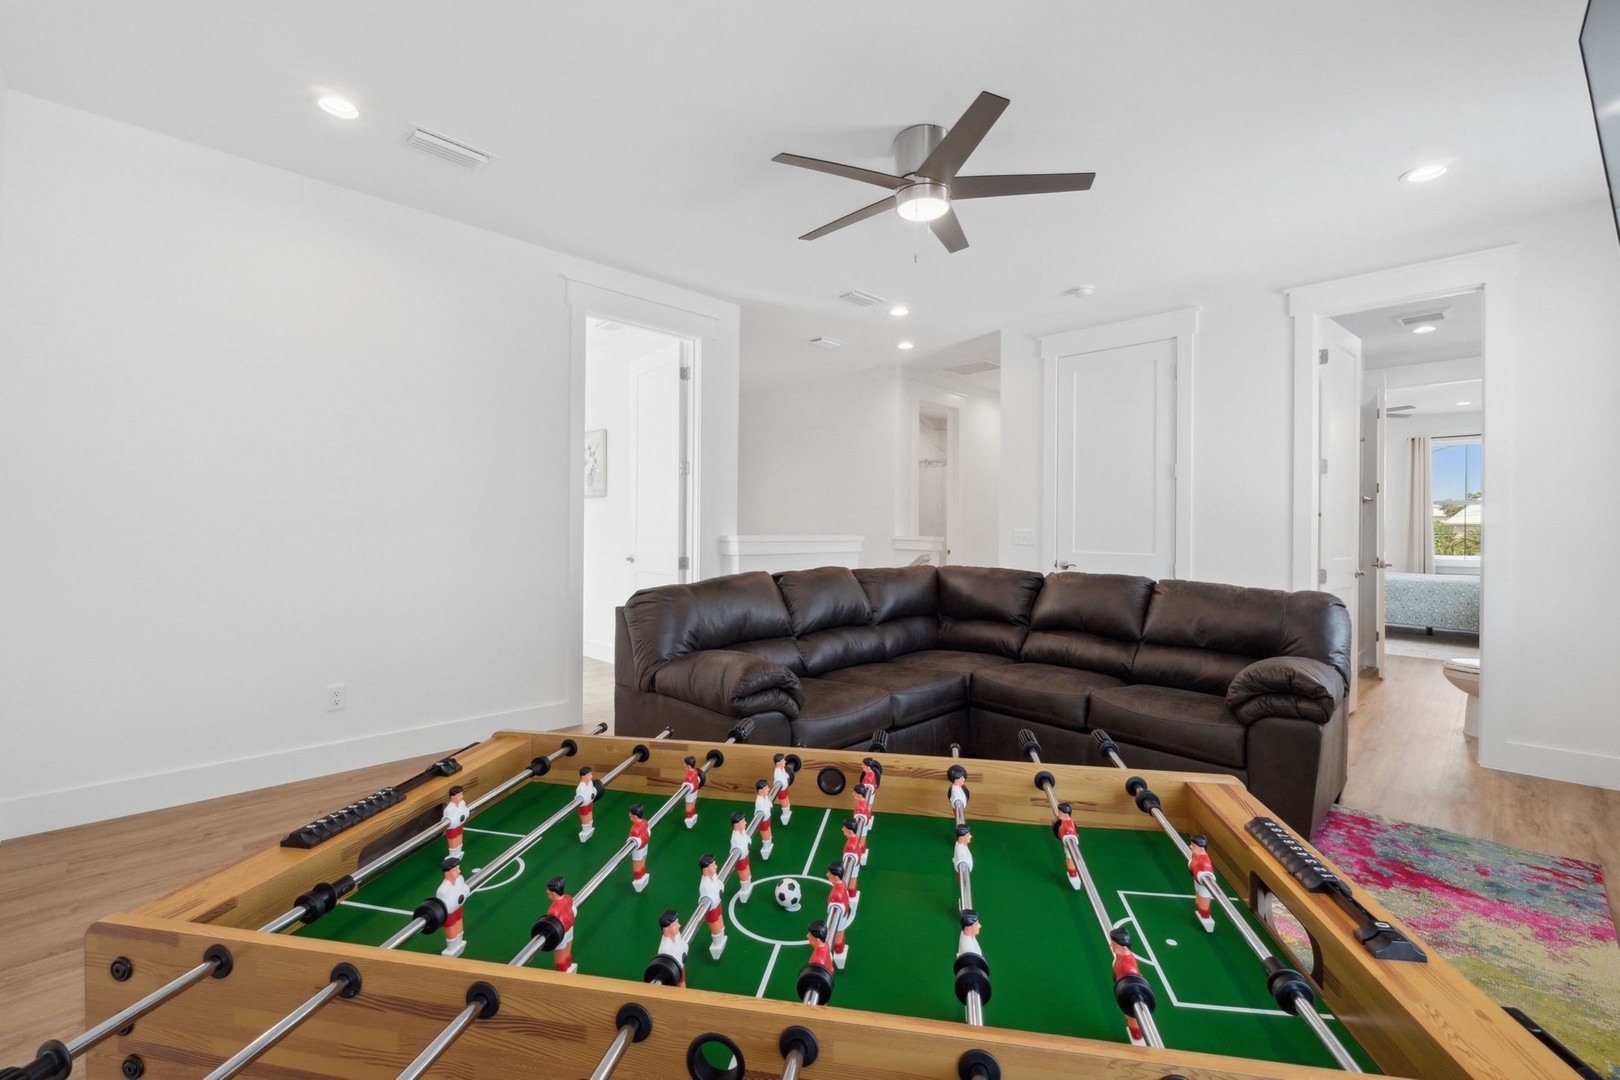 Second floor living space with Smart TV, and foosball table